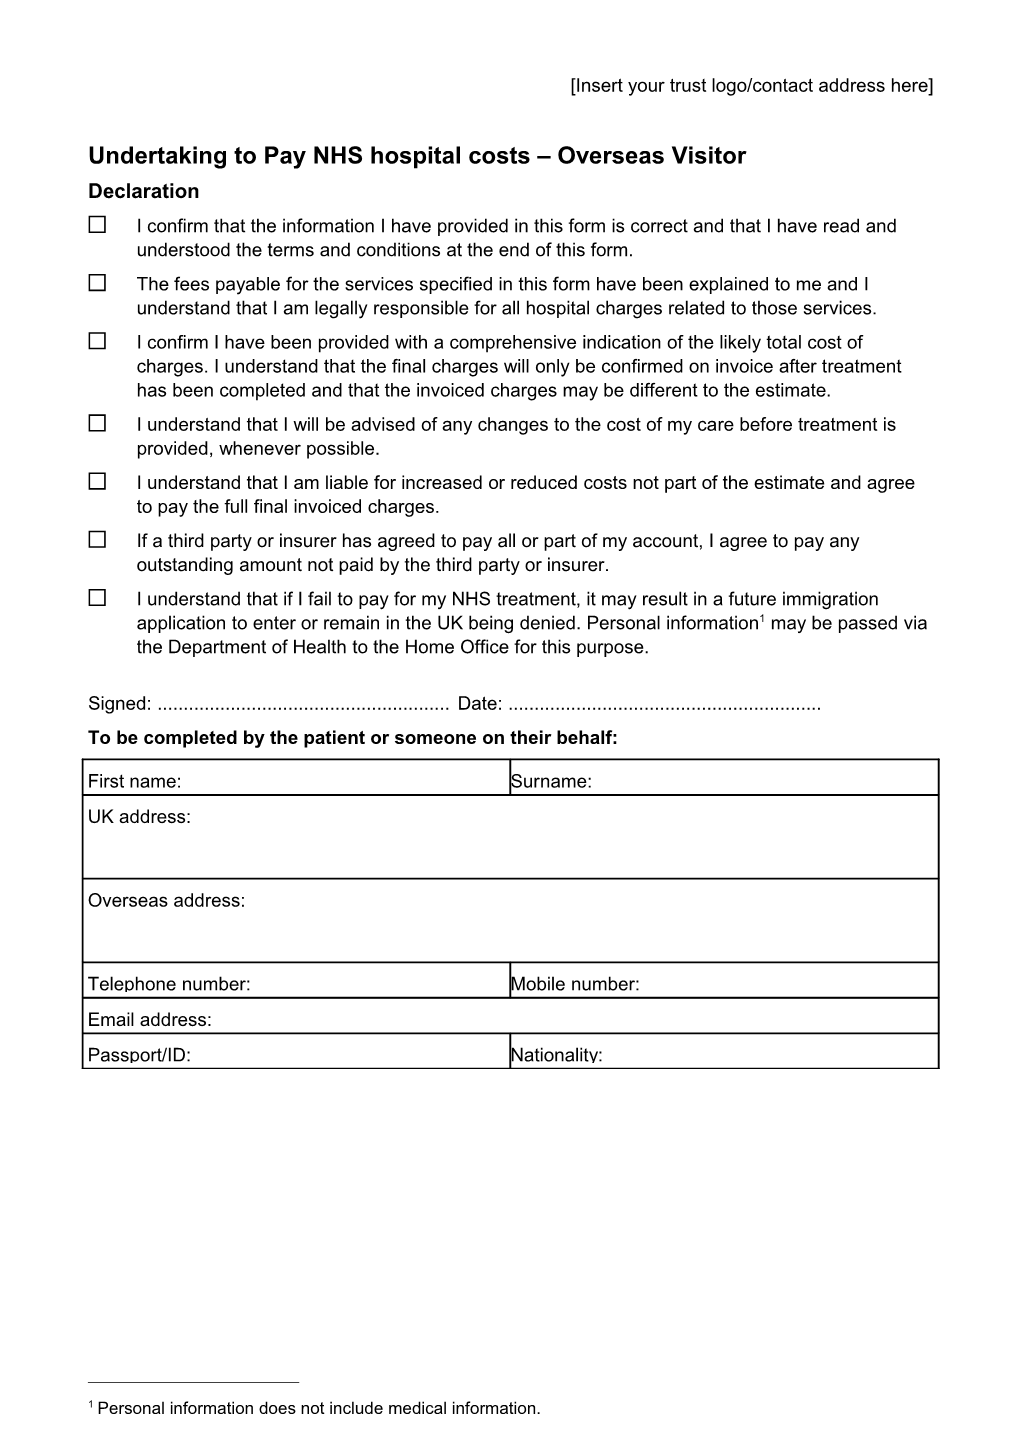 NHS Overseas Visitor Form